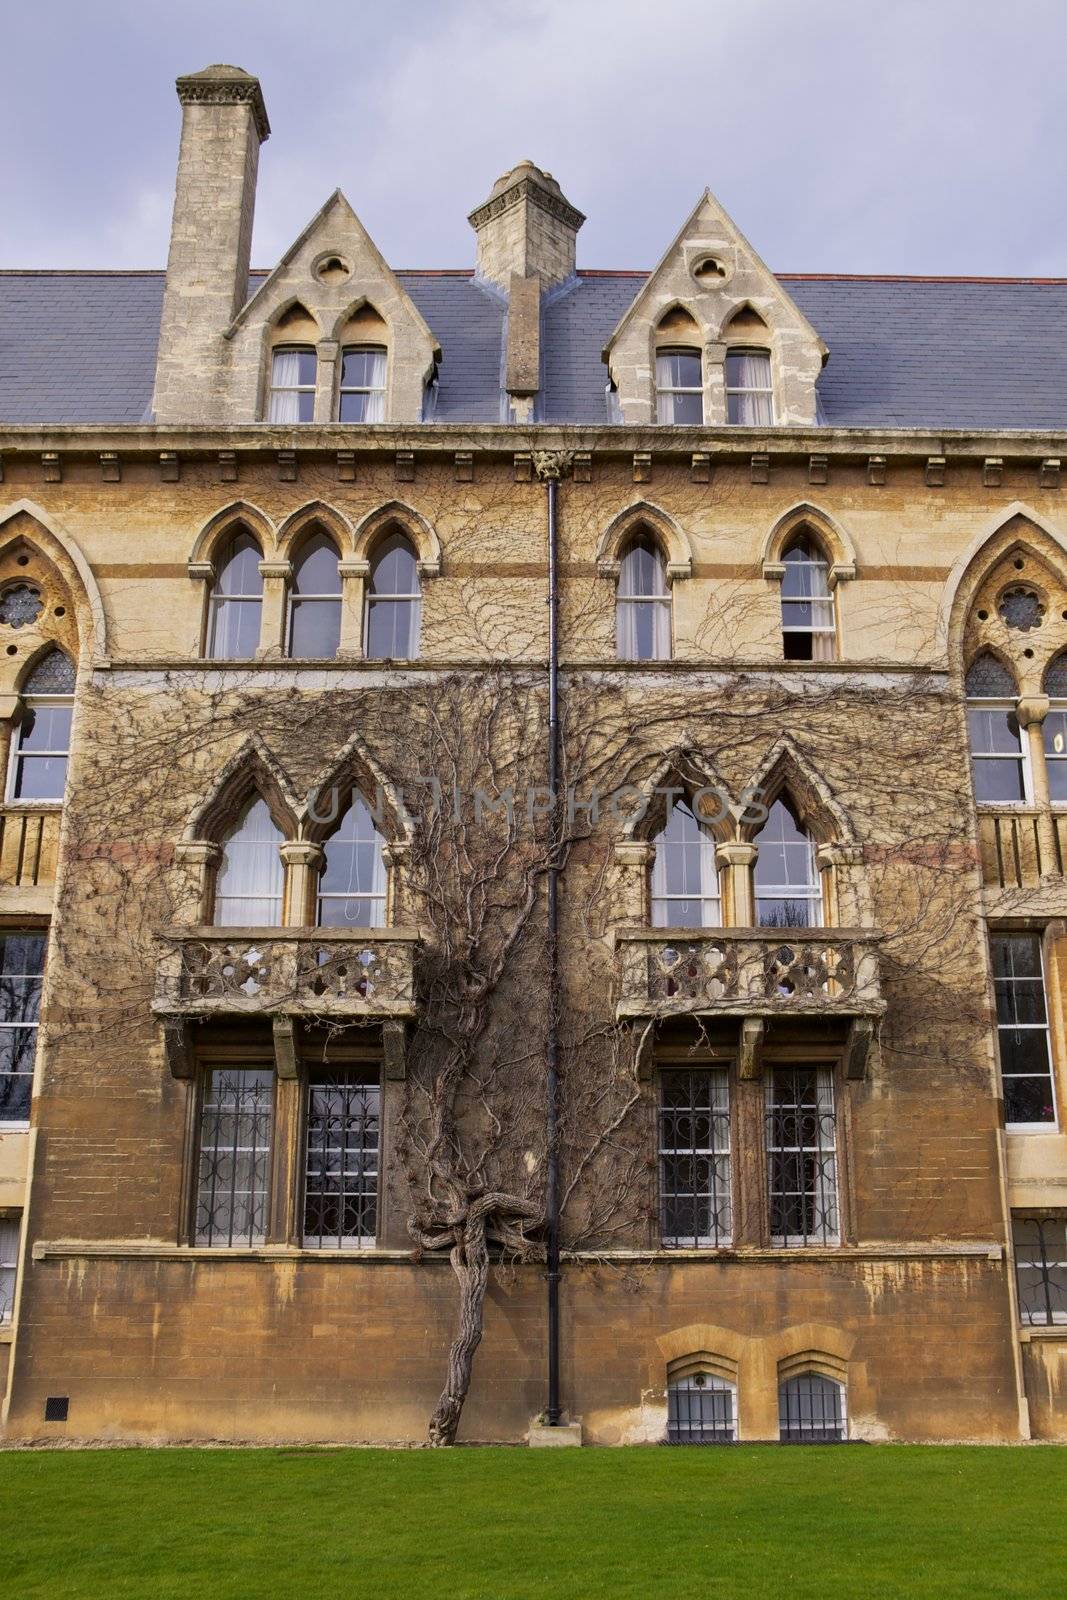 Historical building of Christ Church college in Oxford, England